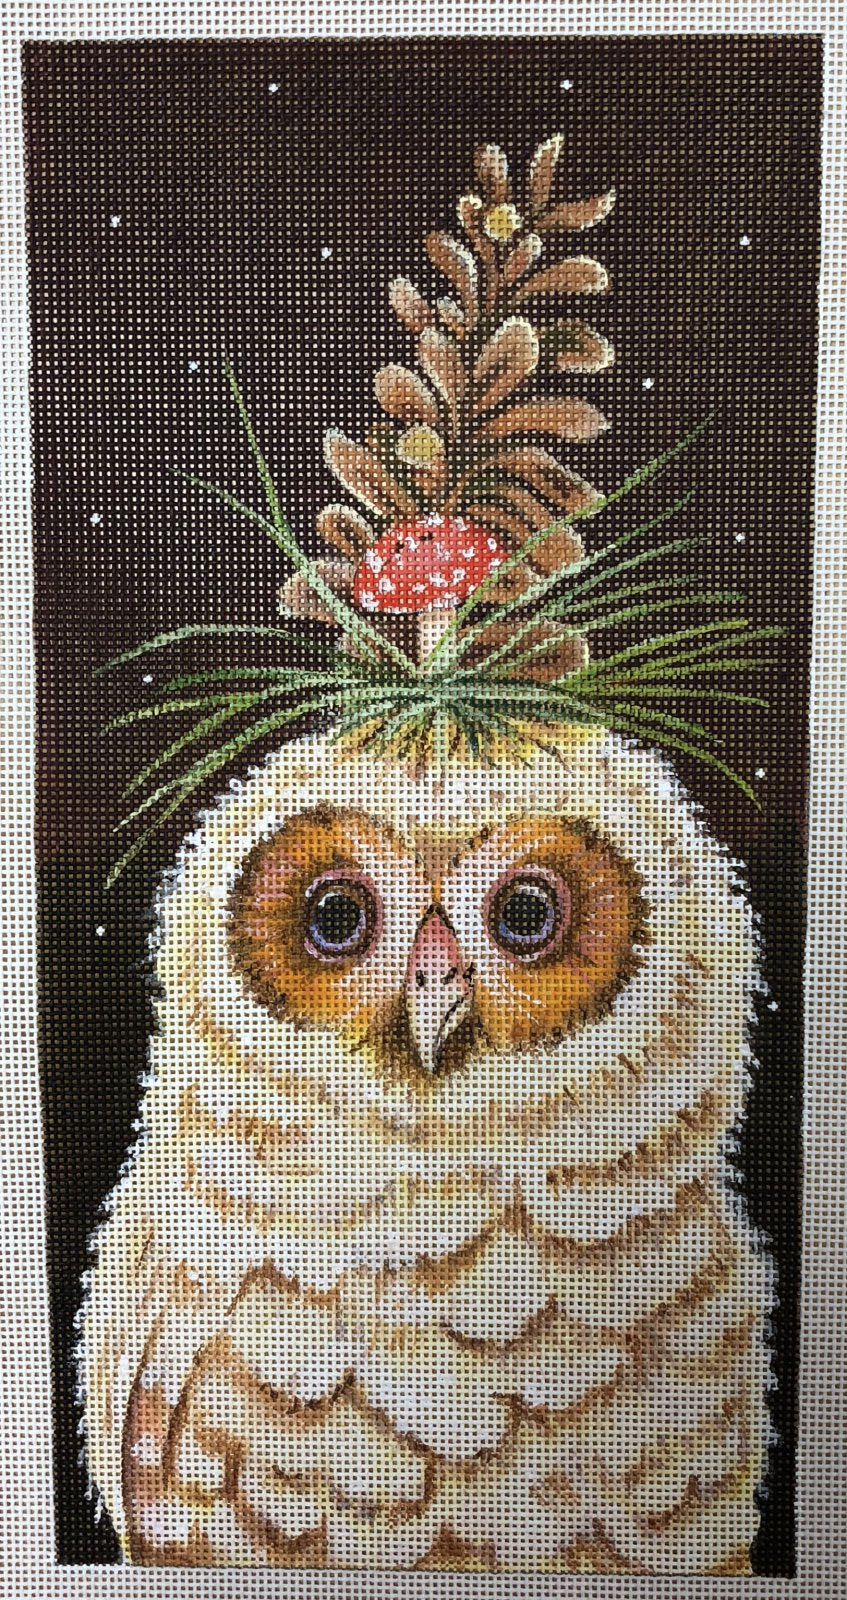 owlet with pinecone hat